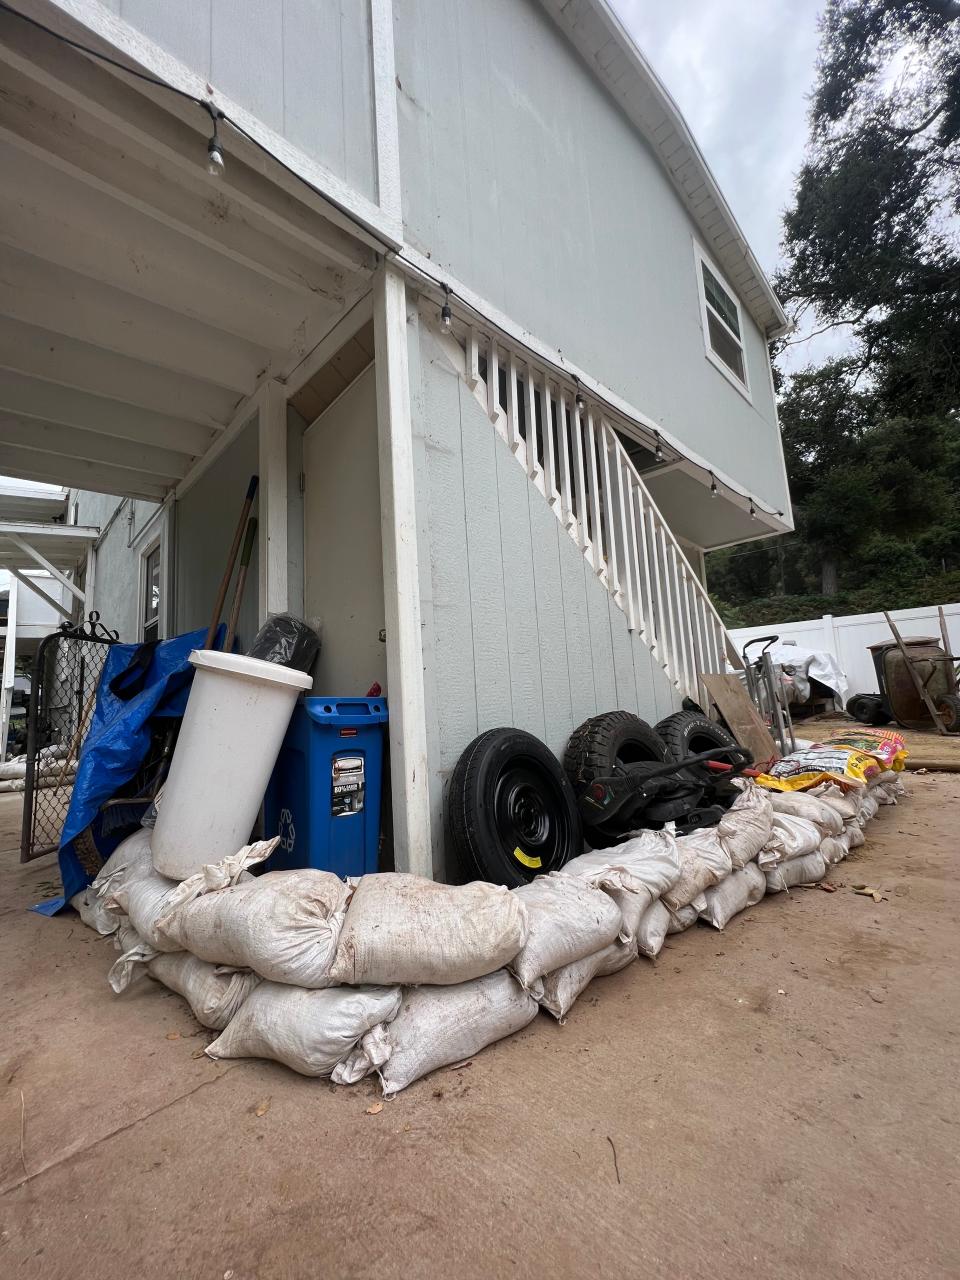 Residents in the Foster Park neighborhood north of Ventura prepared for rain from Tropical Storm Hilary by placing sandbags around homes.